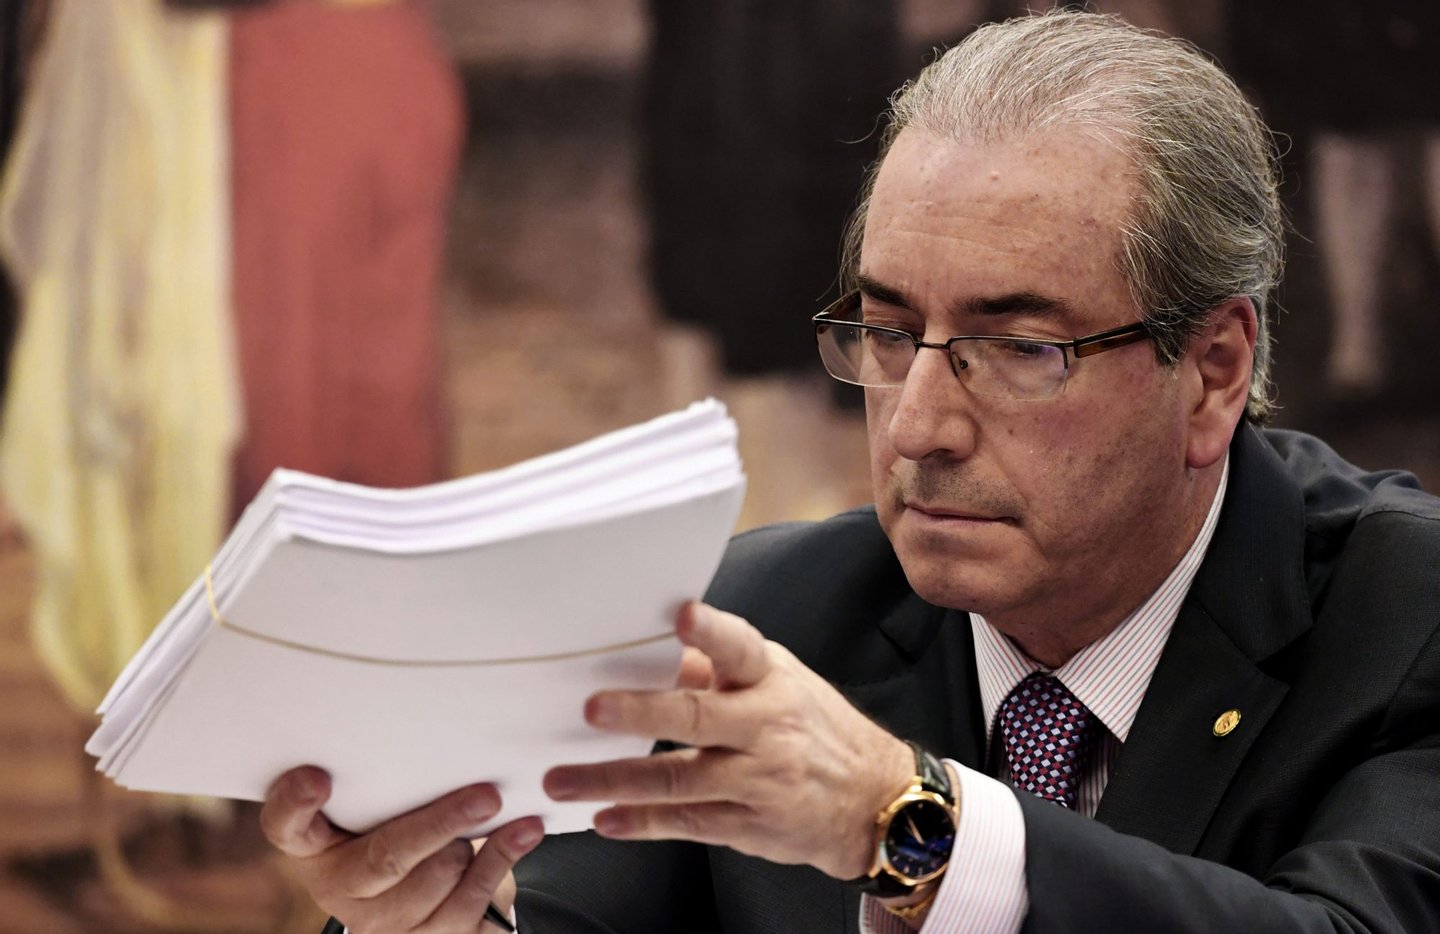 Brazilian deputy Eduardo Cunha, former president of the Lower House of Congress, is pictured during the session of the Committee on Constitution and Justice, in Brasilia on July 12, 2016. Cunha, the Brazilian politician who spearheaded the drive to impeach suspended president Dilma Rousseff, on July 7 resigned from his post as congressional speaker as a corruption probe closed in on him. / AFP / EVARISTO SA (Photo credit should read EVARISTO SA/AFP/Getty Images)